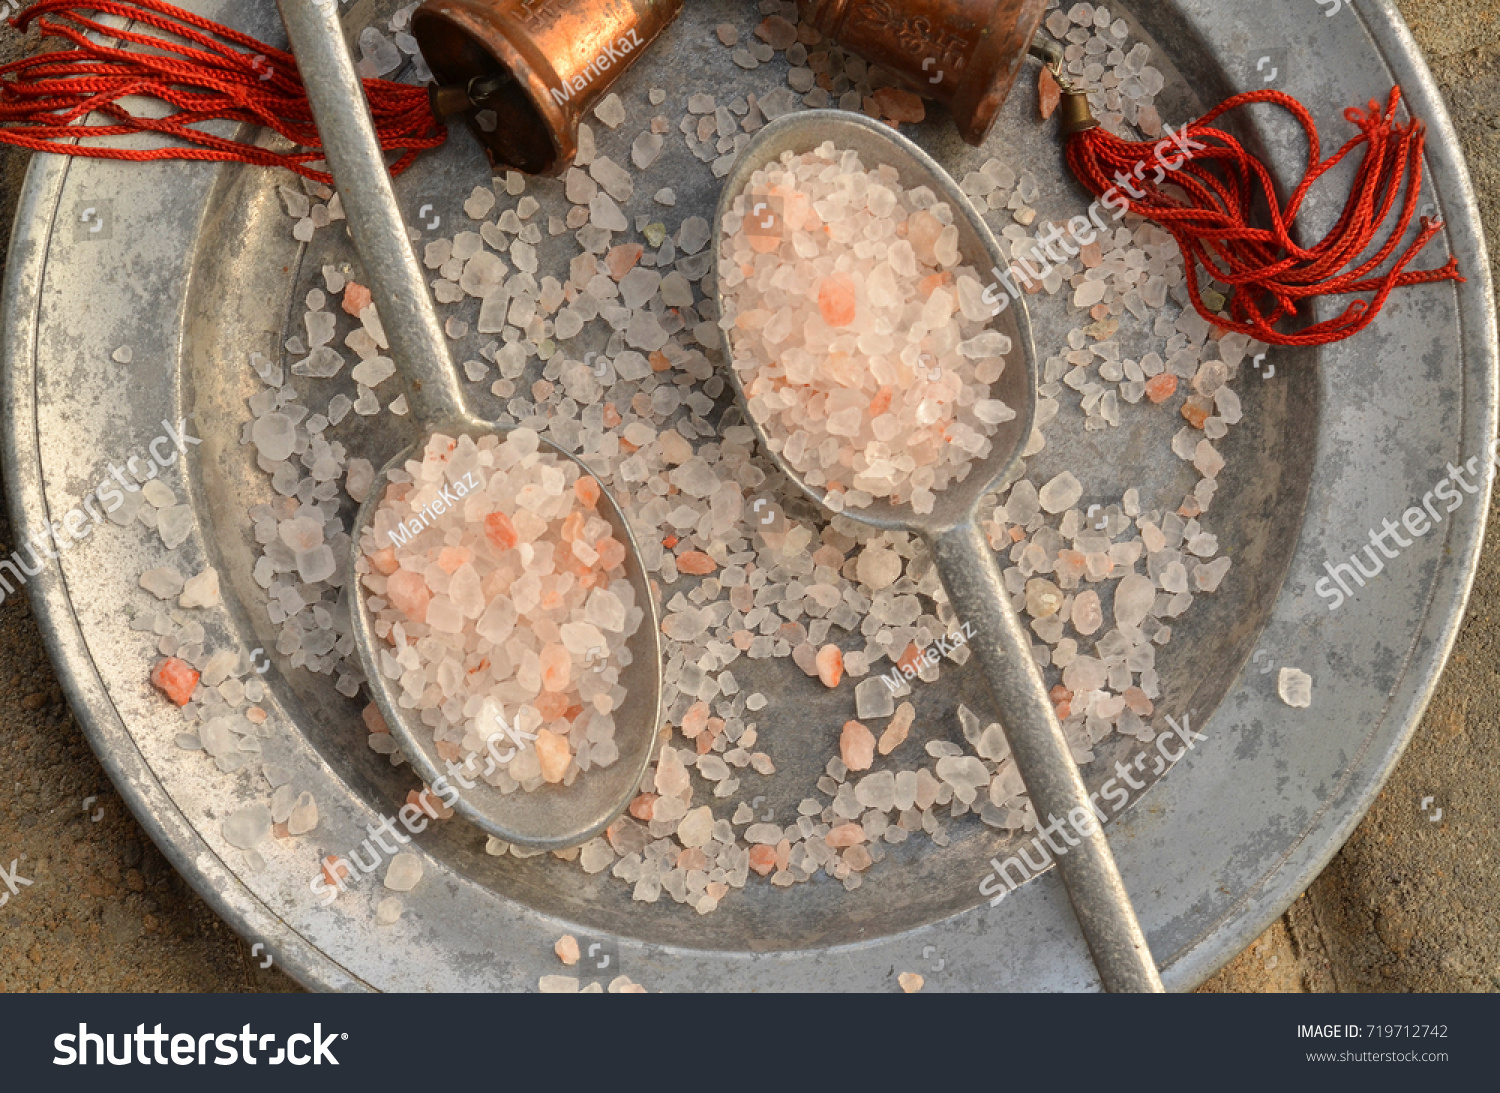 course pink Himalayan salt on pewter plate and pewter spoons and with red tasseled bells from the region #719712742